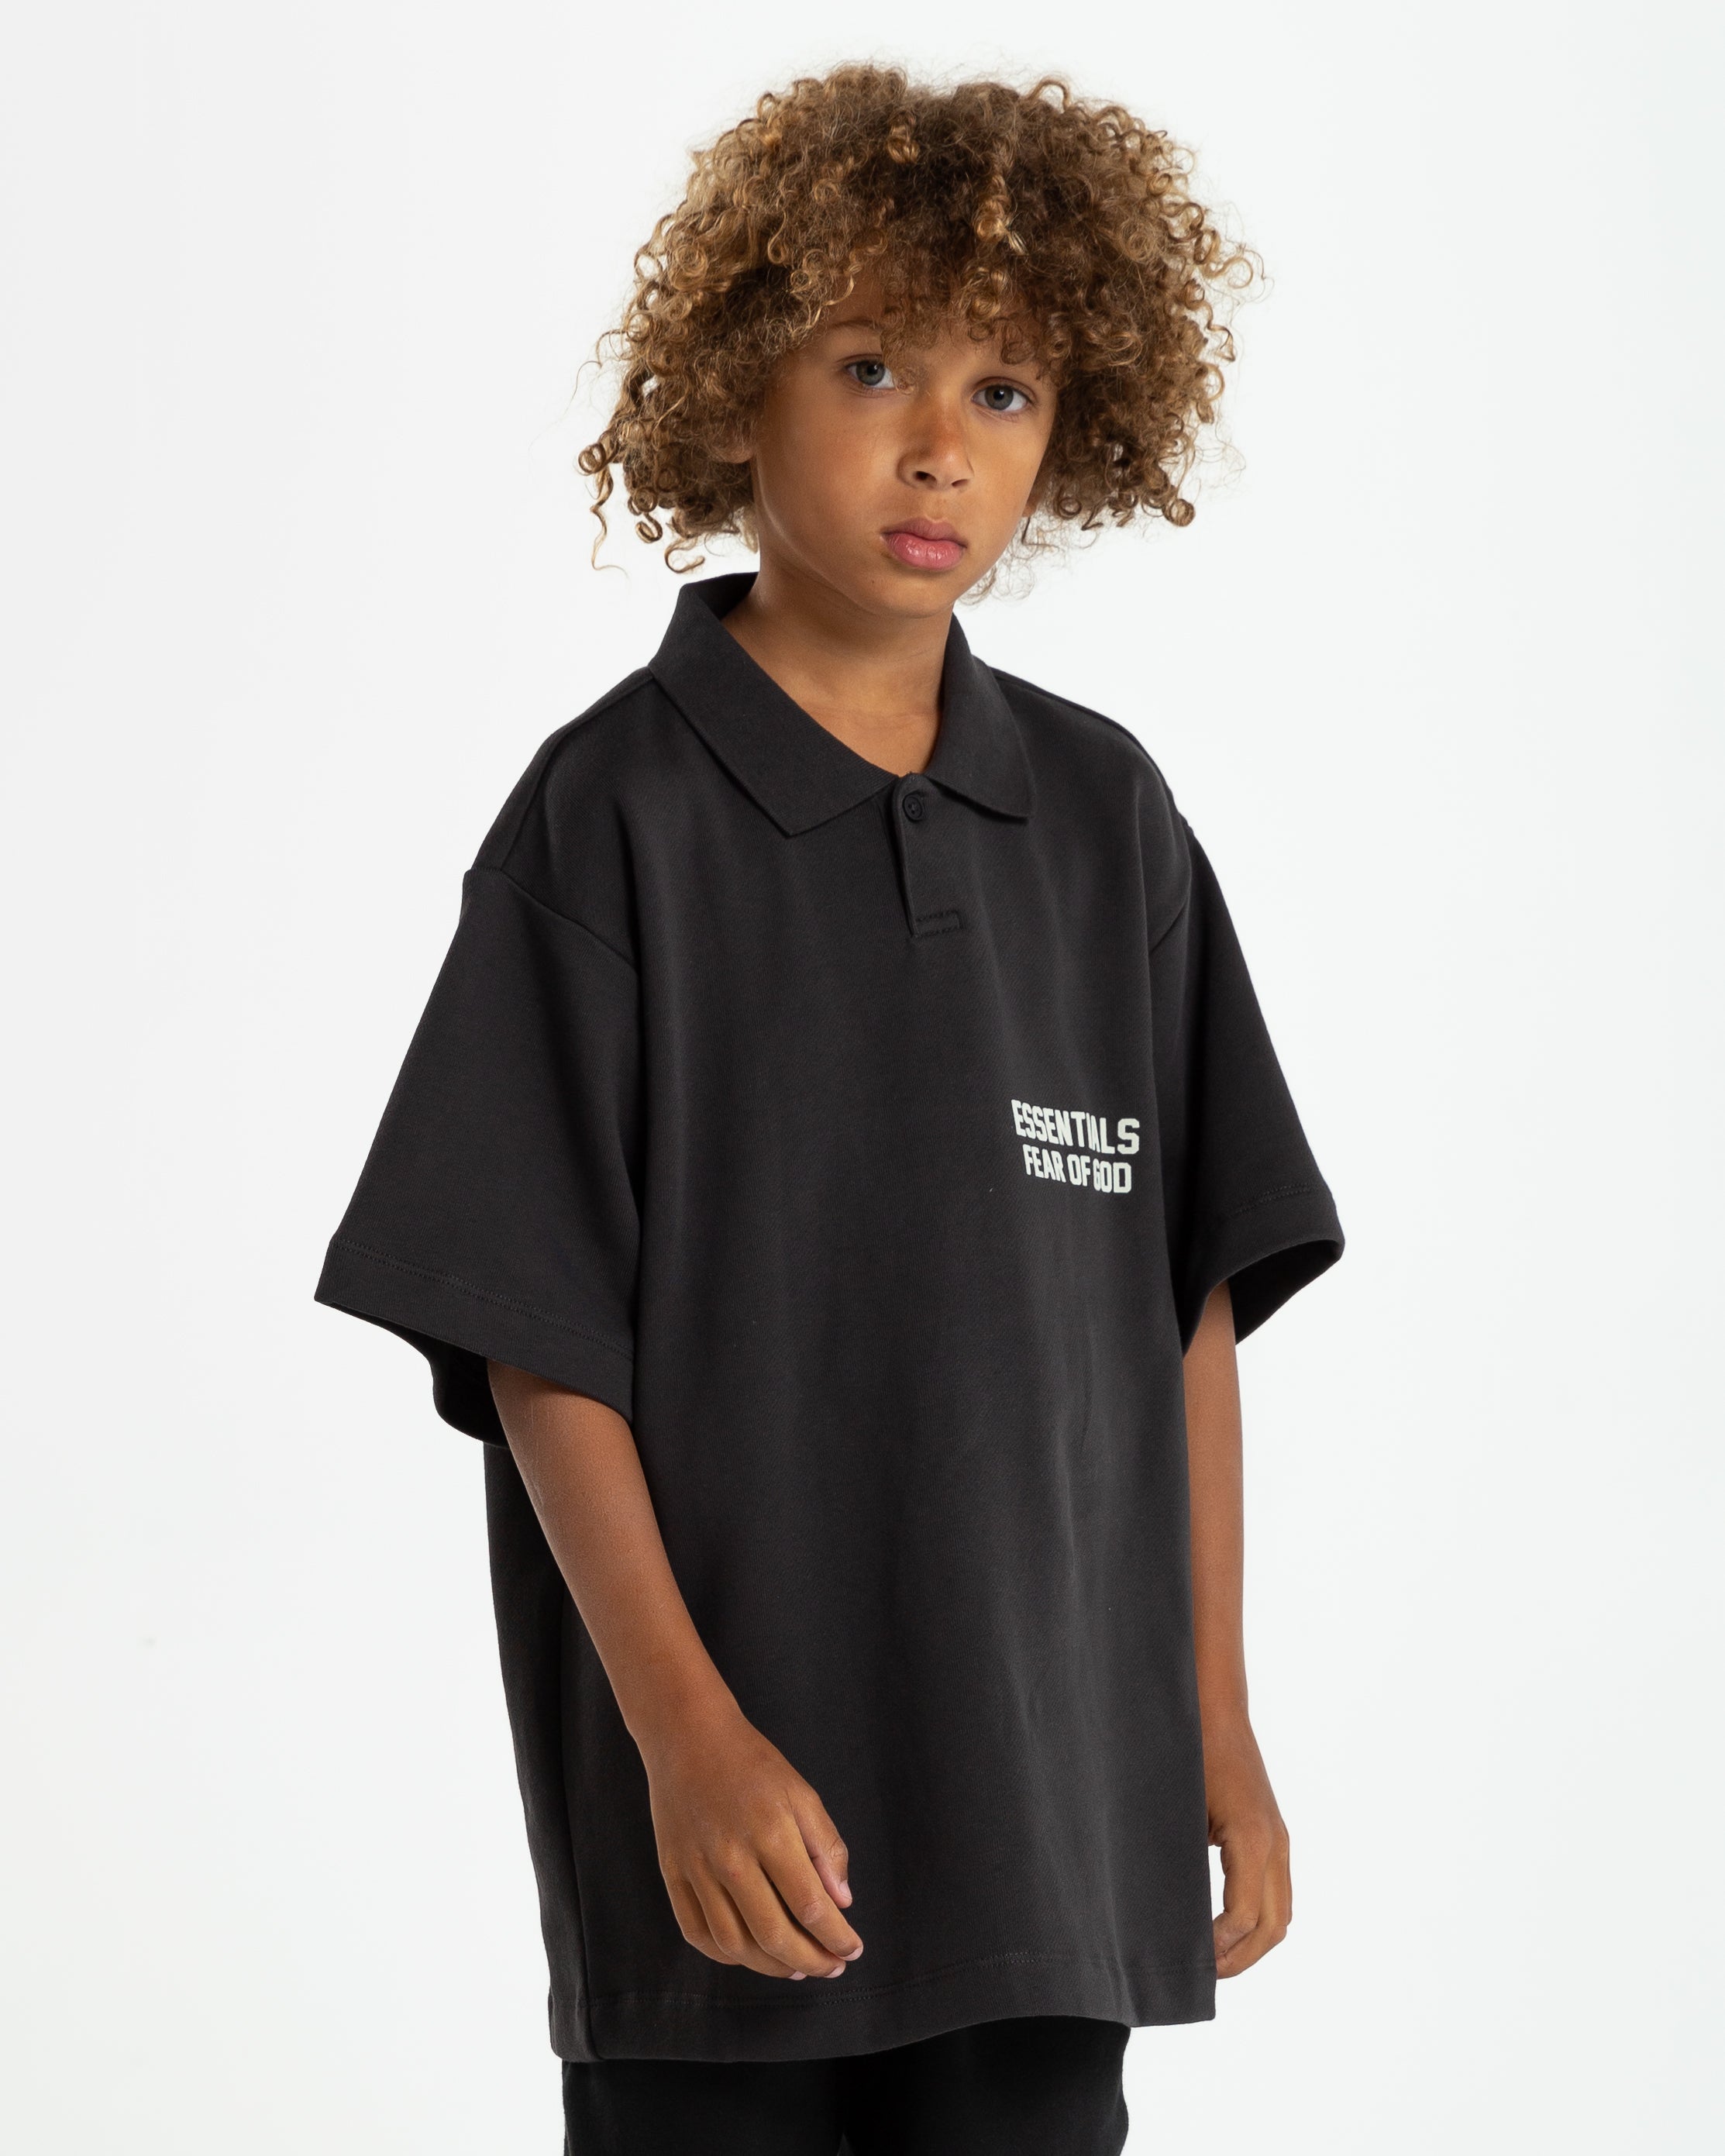 Kids' S/S Polo in Iron